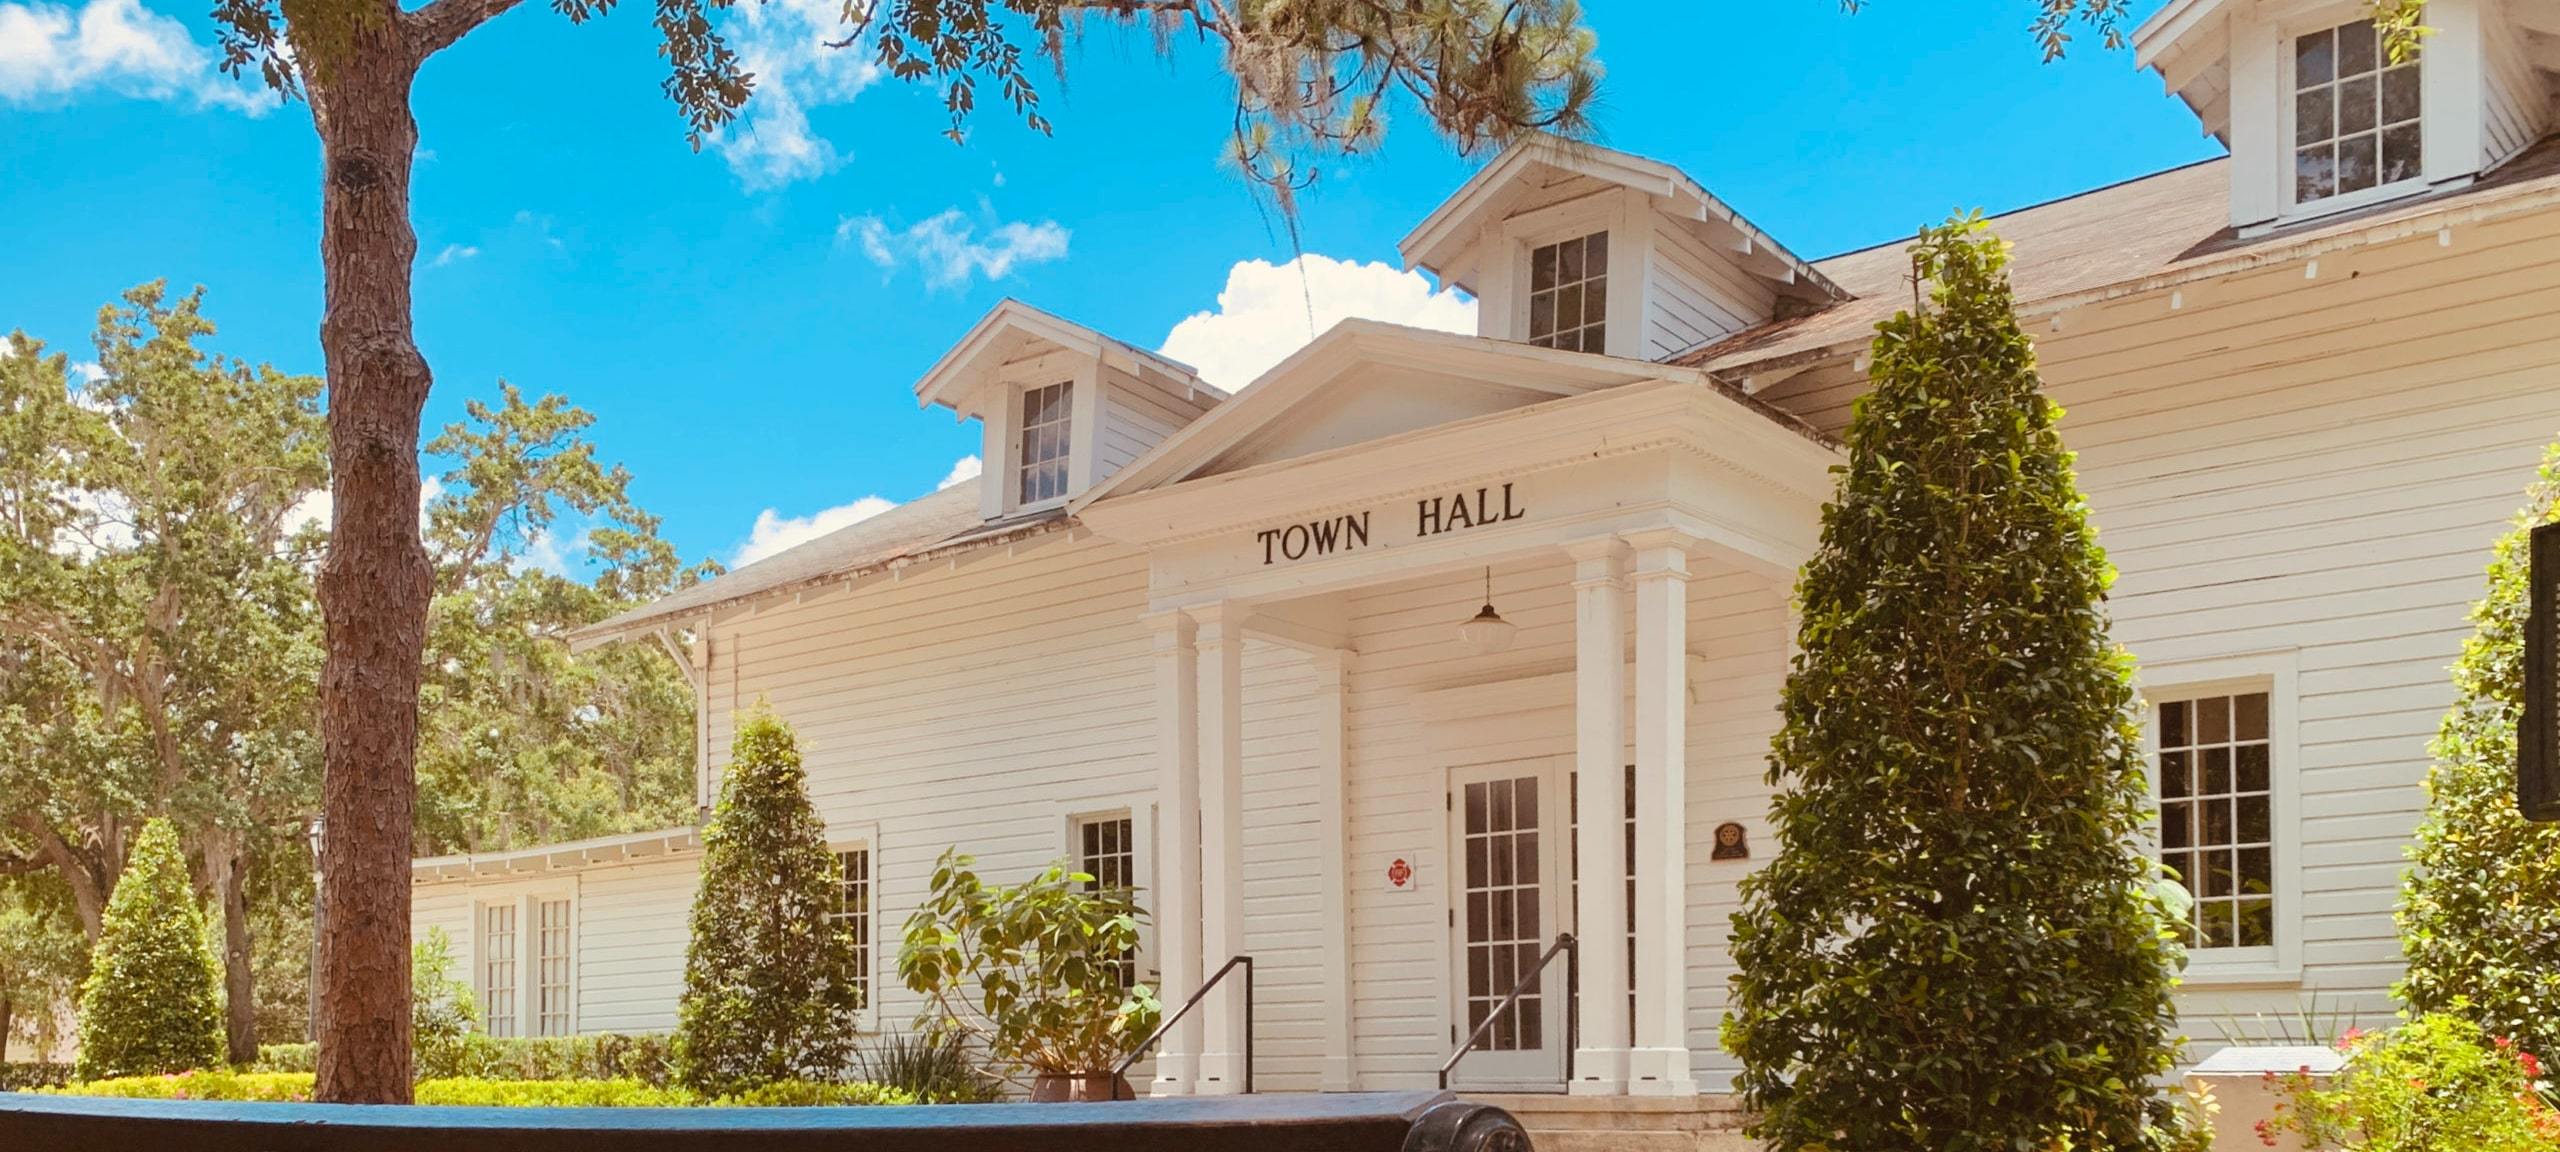 Historic Windermere, FL Town Hall building on a sunny day